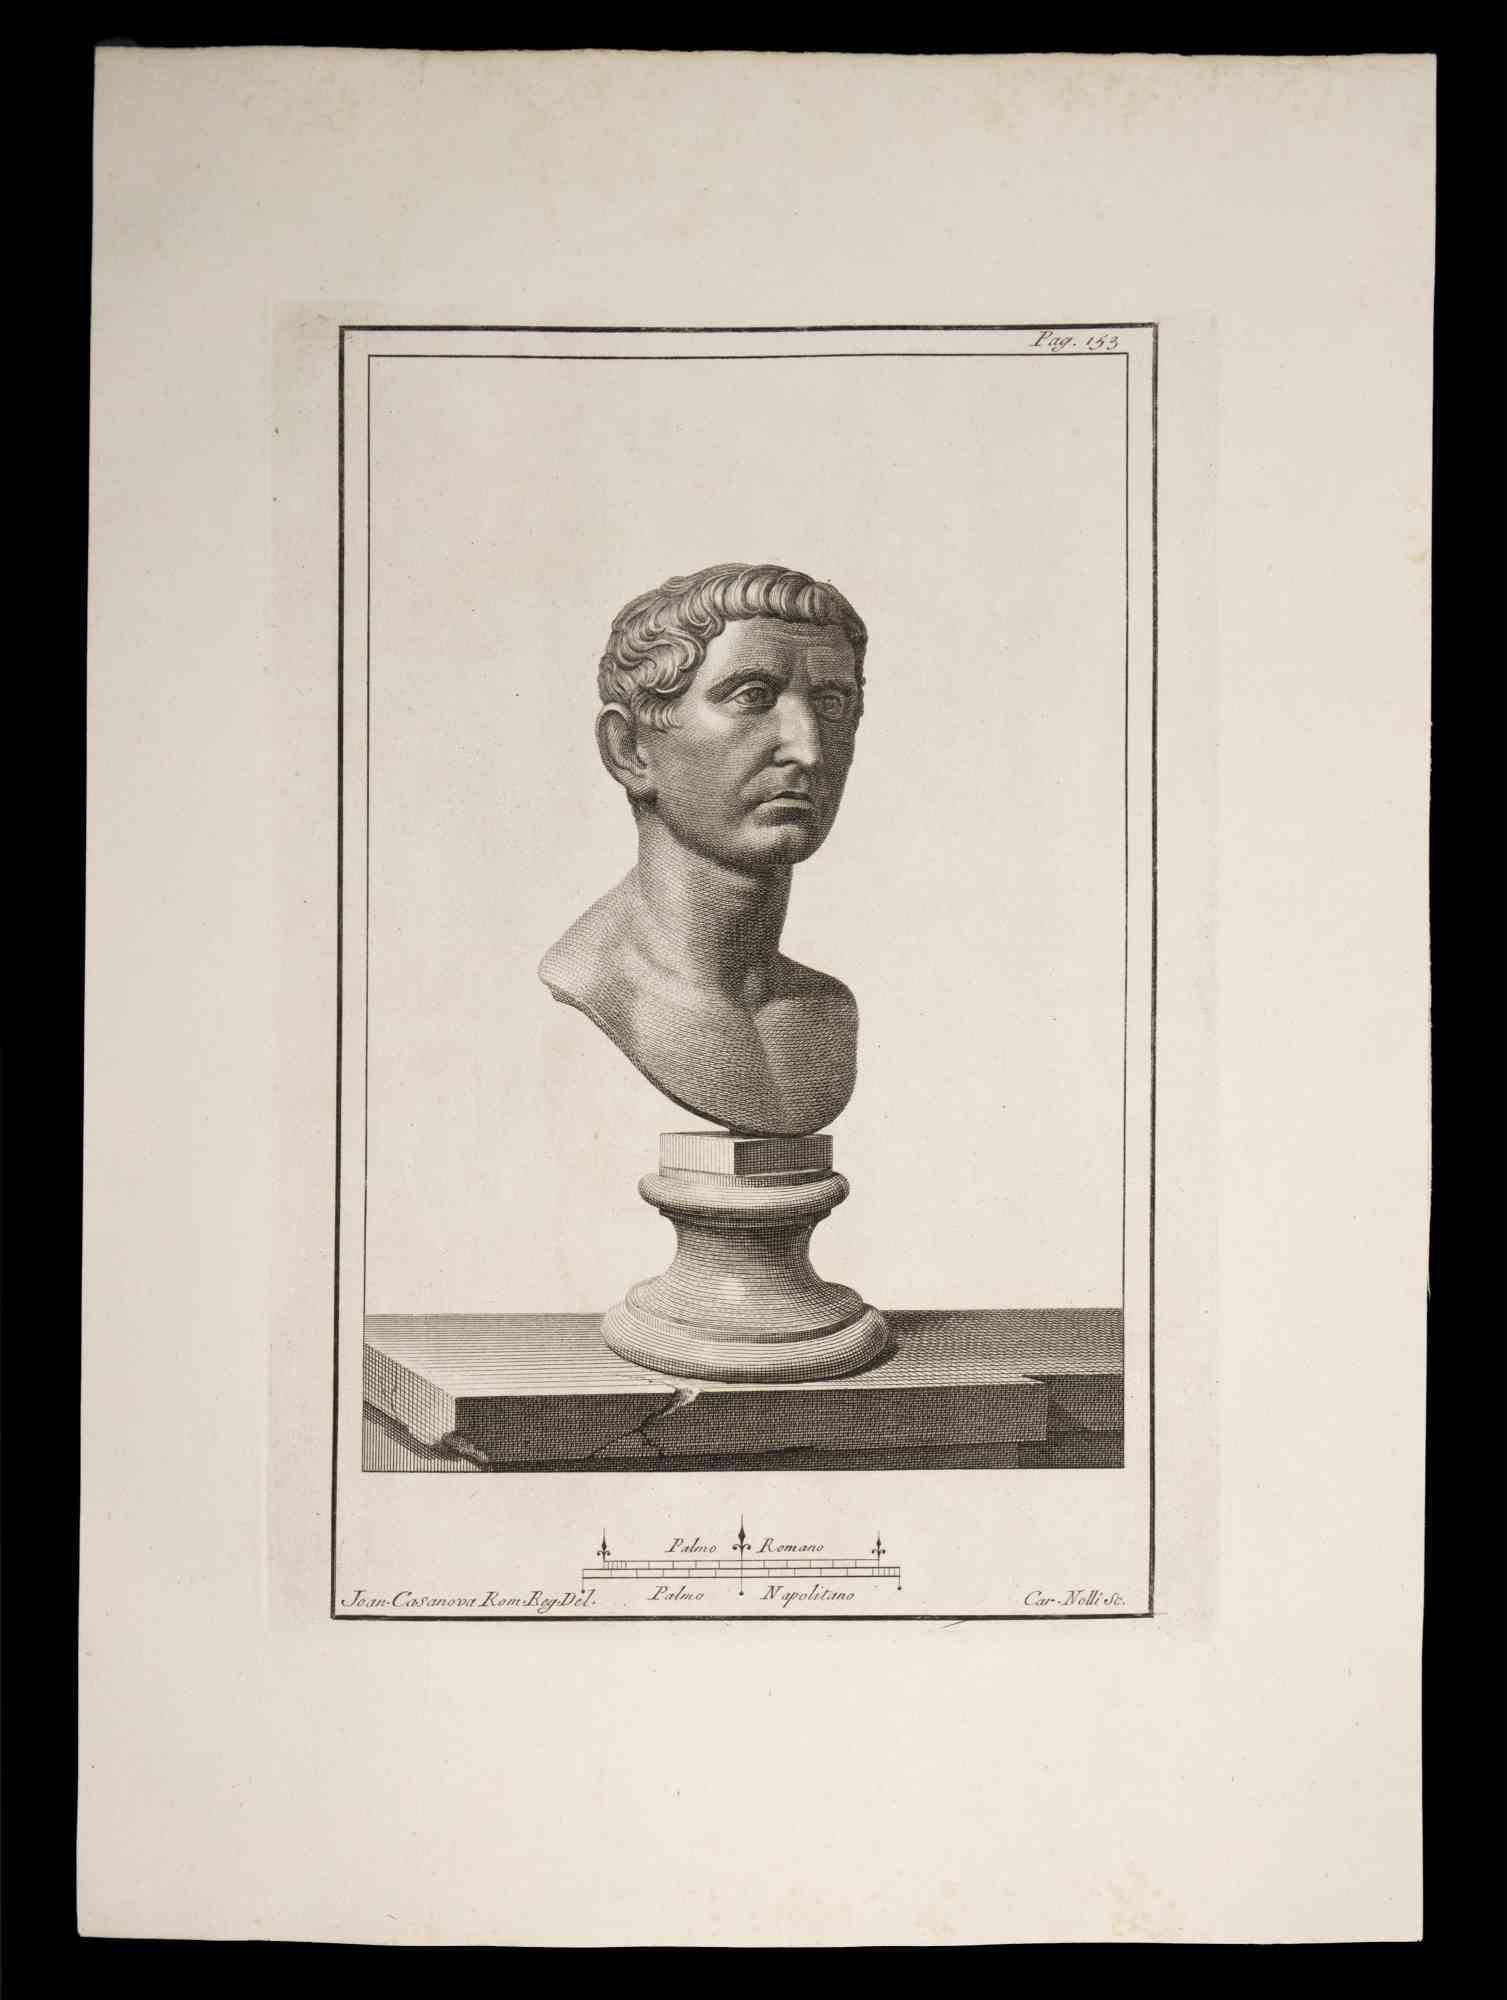 Ancient Roman Bust, from the series "Antiquities of Herculaneum", is an original etching on paper realized by Carlo Nolli in the 18th century.

Signed on the plate, on the lower right.

Good conditions with minor stain.

The etching belongs to the